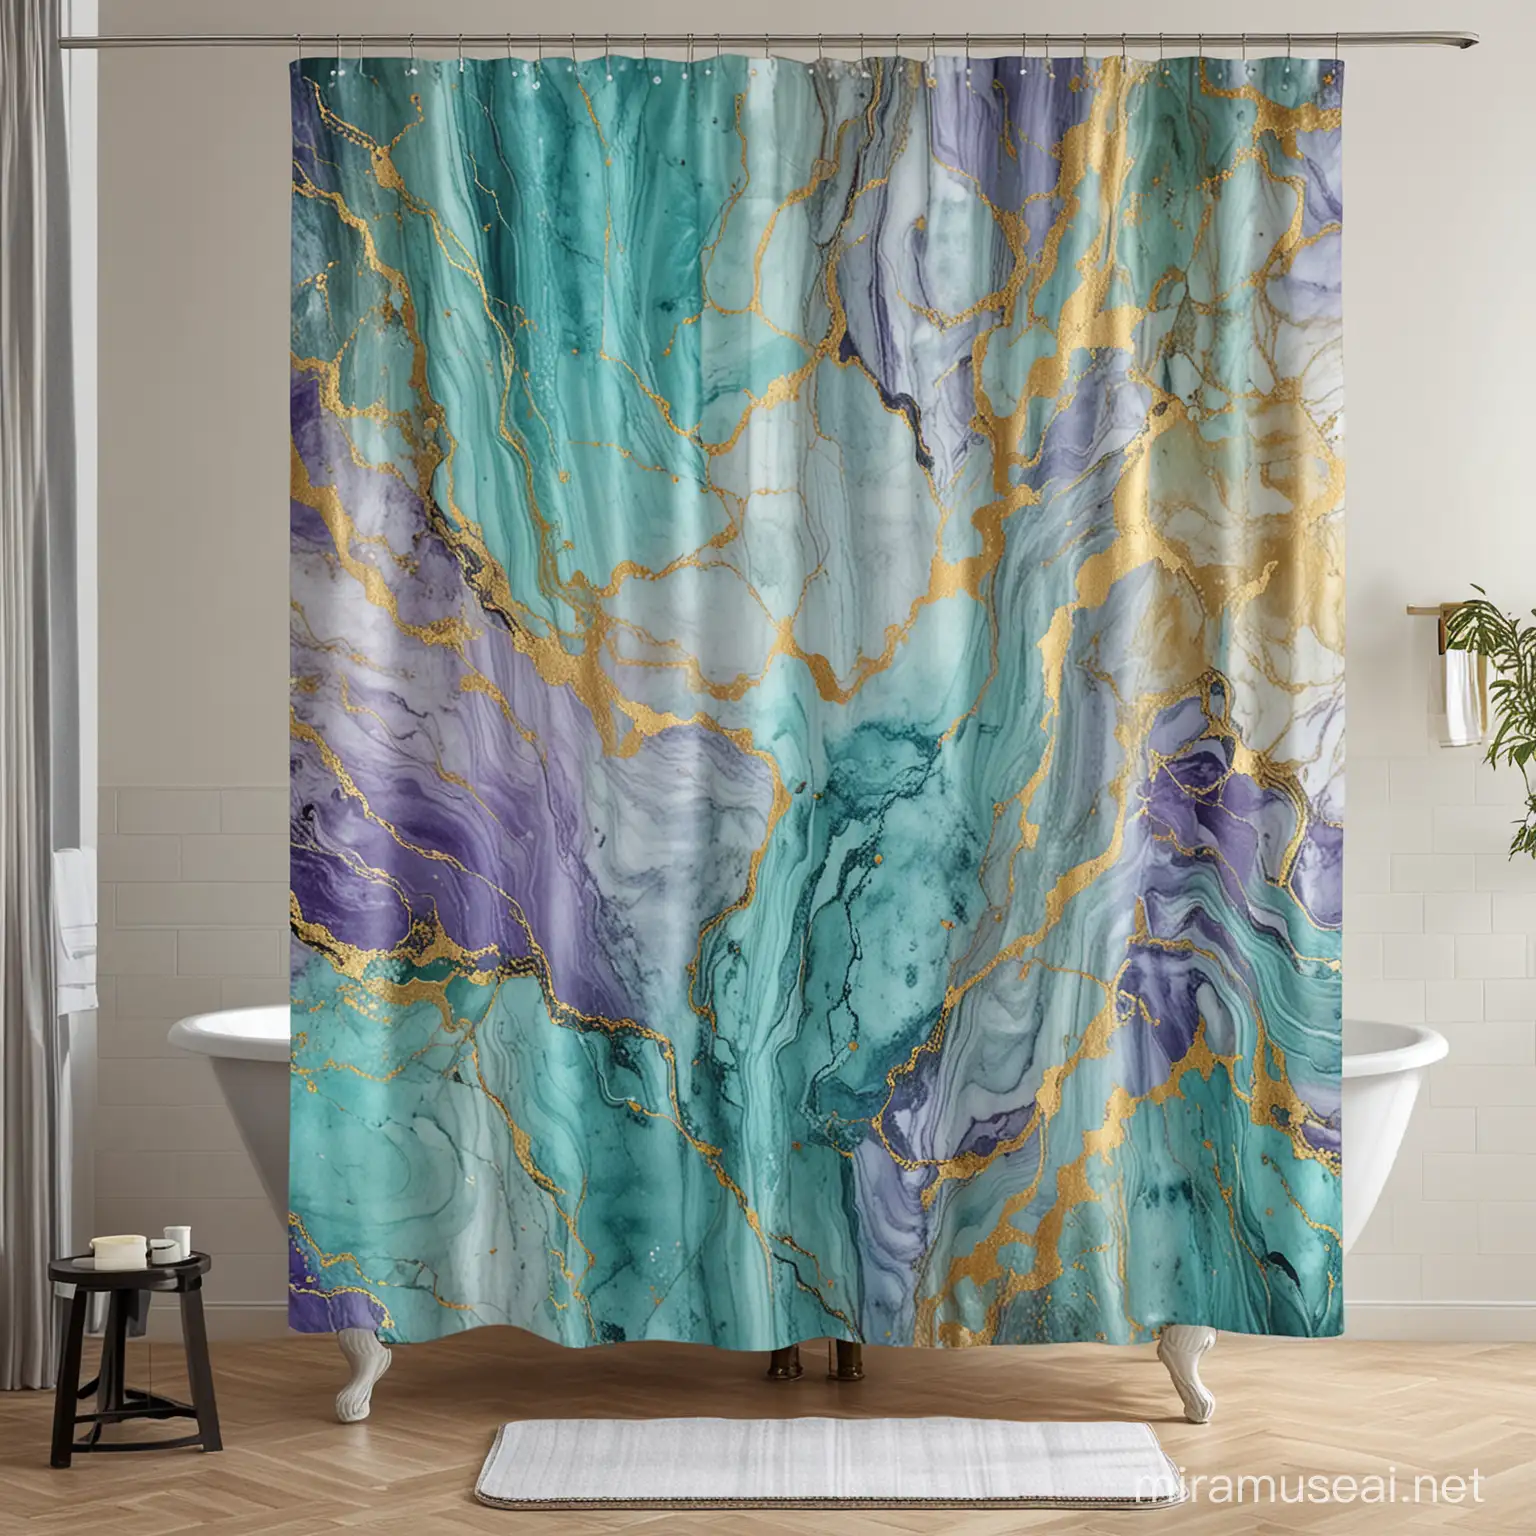 Colorful Textured Marble Shower Curtain in Blue Green Purple and Gold